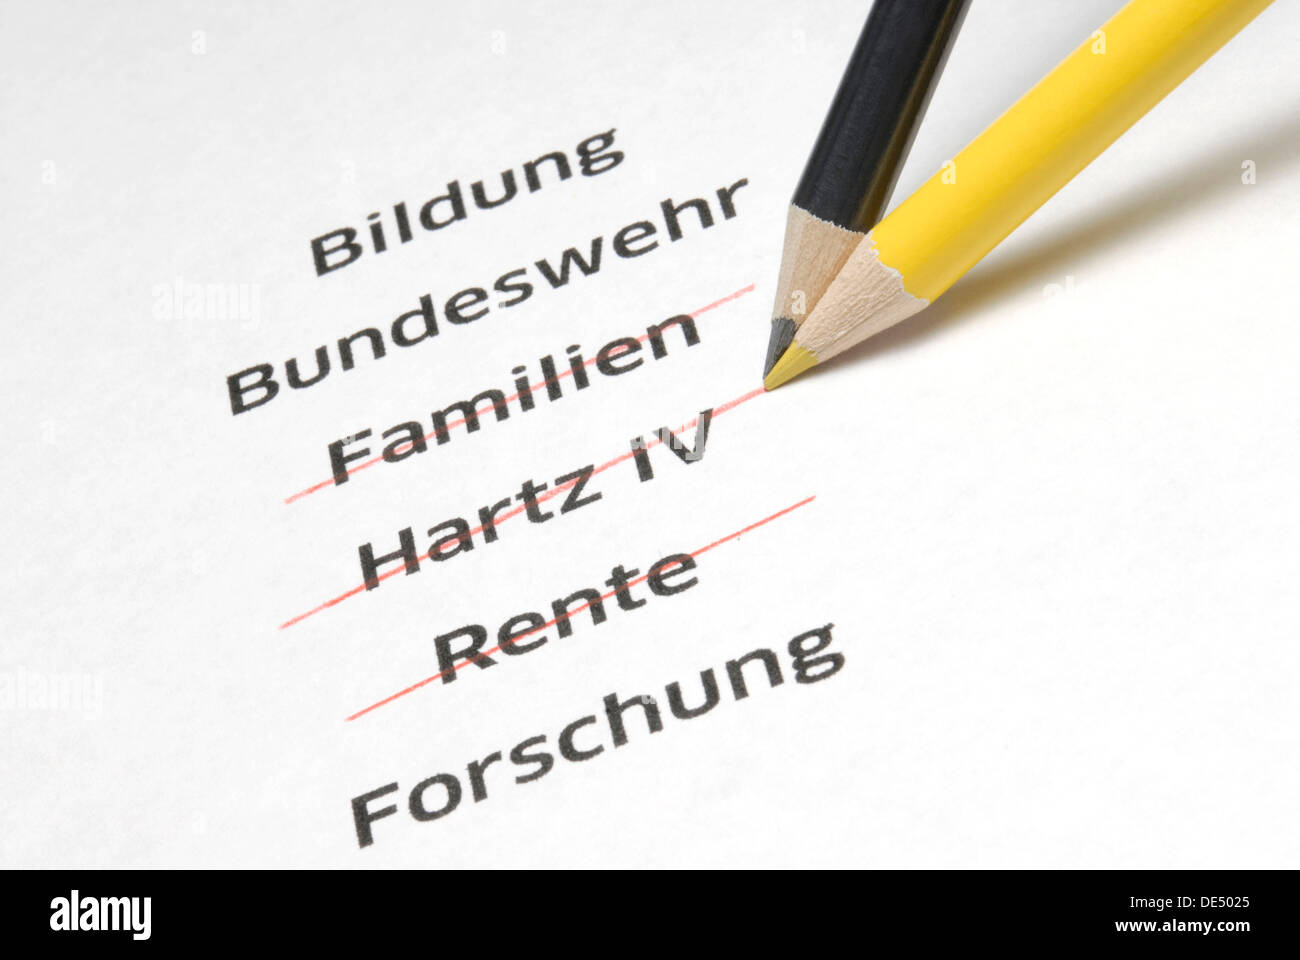 A yellow and a black pencil crossing out the letterings 'Familien', 'Hartz IV' and 'Rente', German for 'families', 'Hartz IV', a Stock Photo